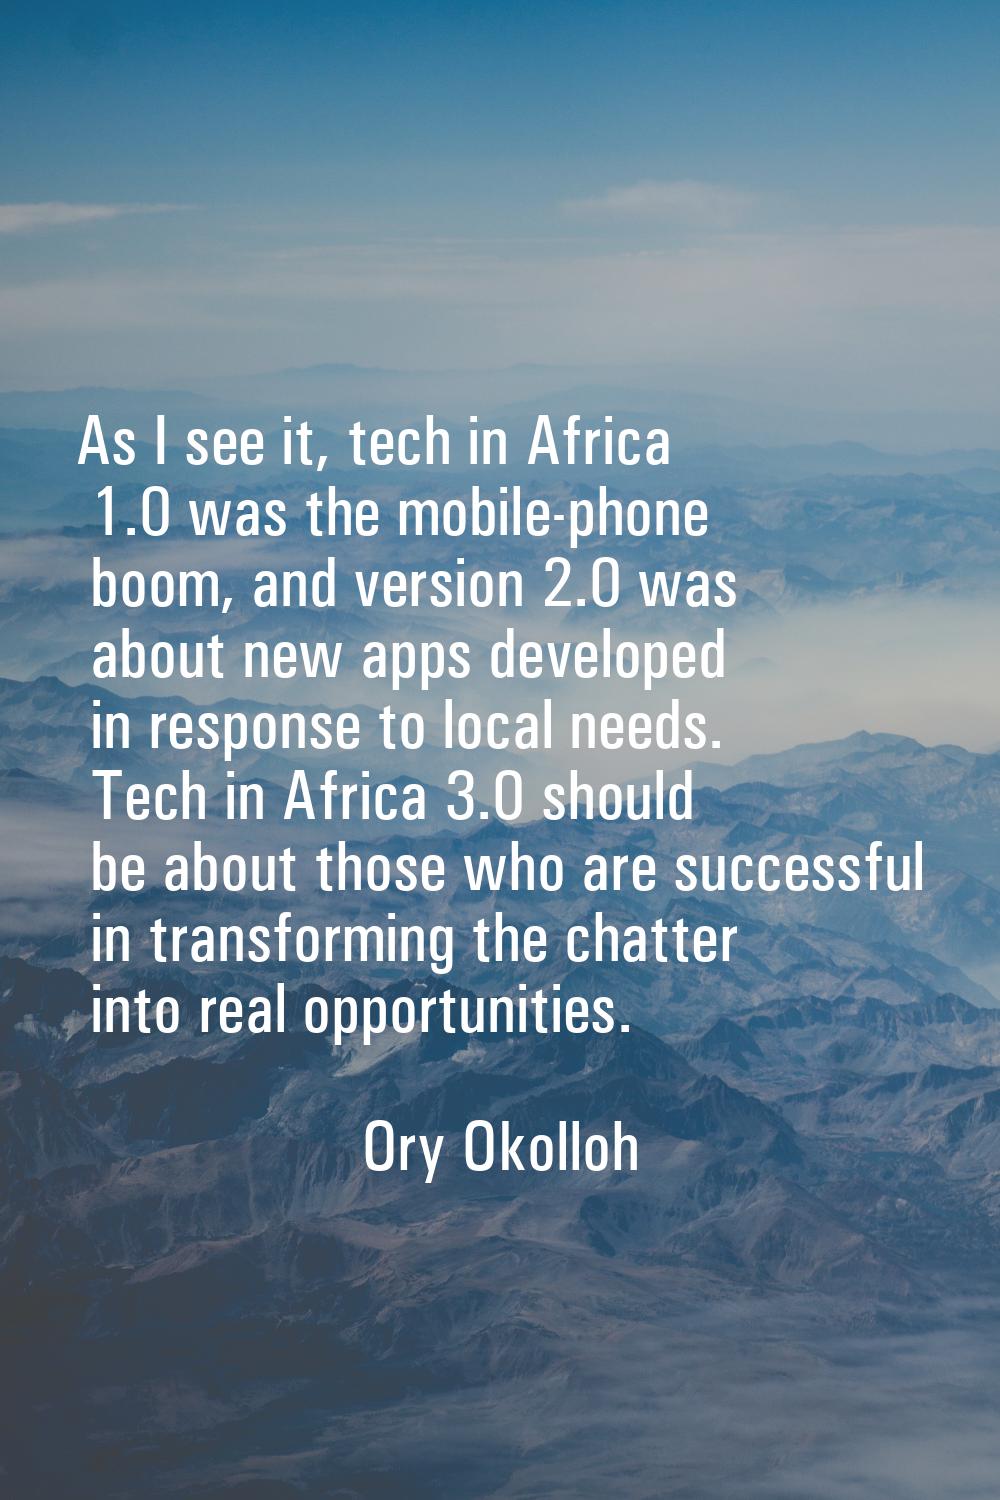 As I see it, tech in Africa 1.0 was the mobile-phone boom, and version 2.0 was about new apps devel